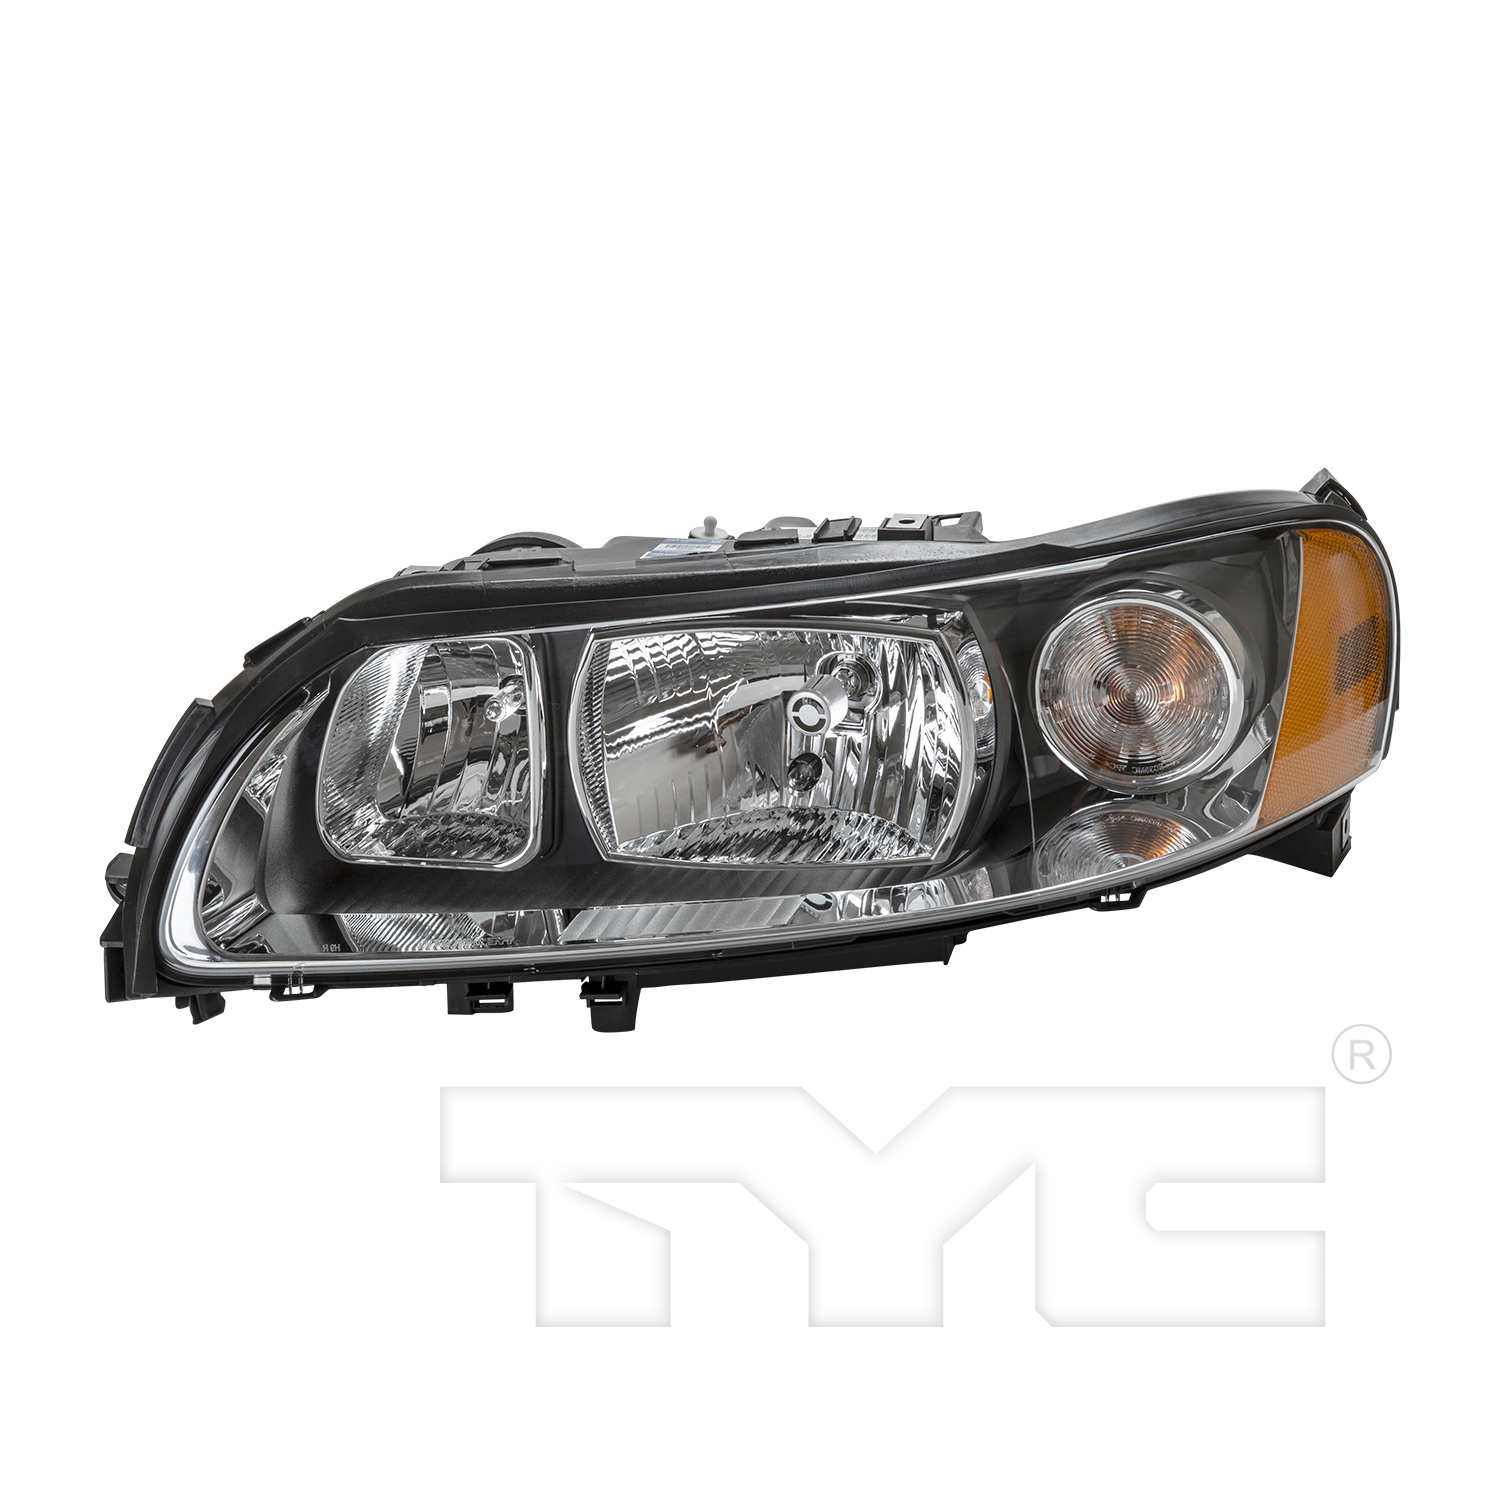 Aftermarket HEADLIGHTS for VOLVO - XC70, XC70,05-07,LT Headlamp assy composite